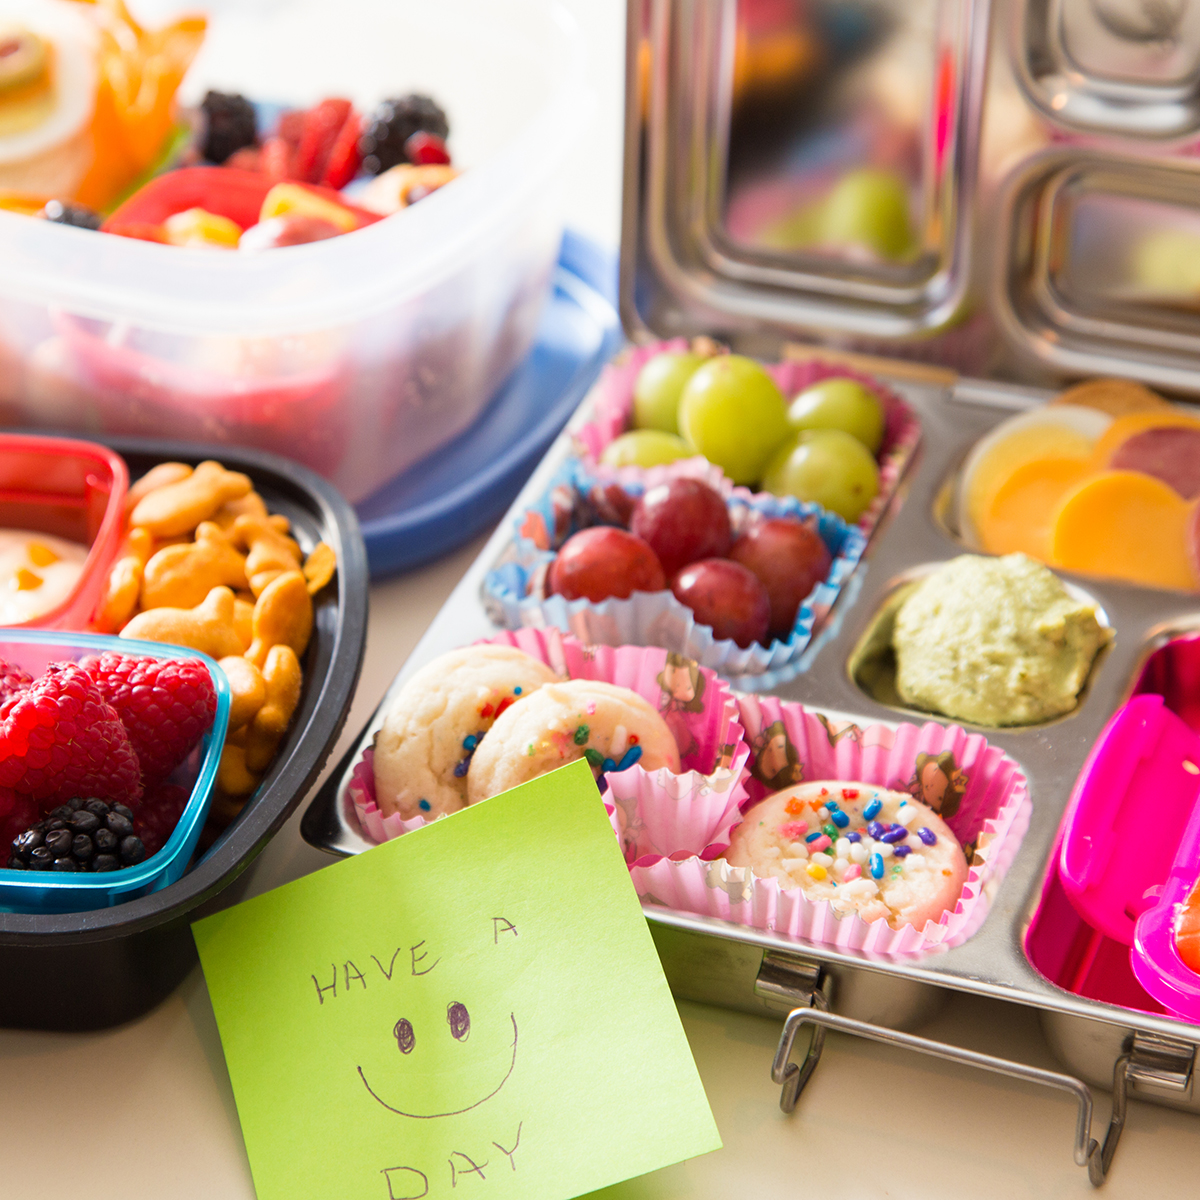 Healthy & clever bento box lunch ideas for kids